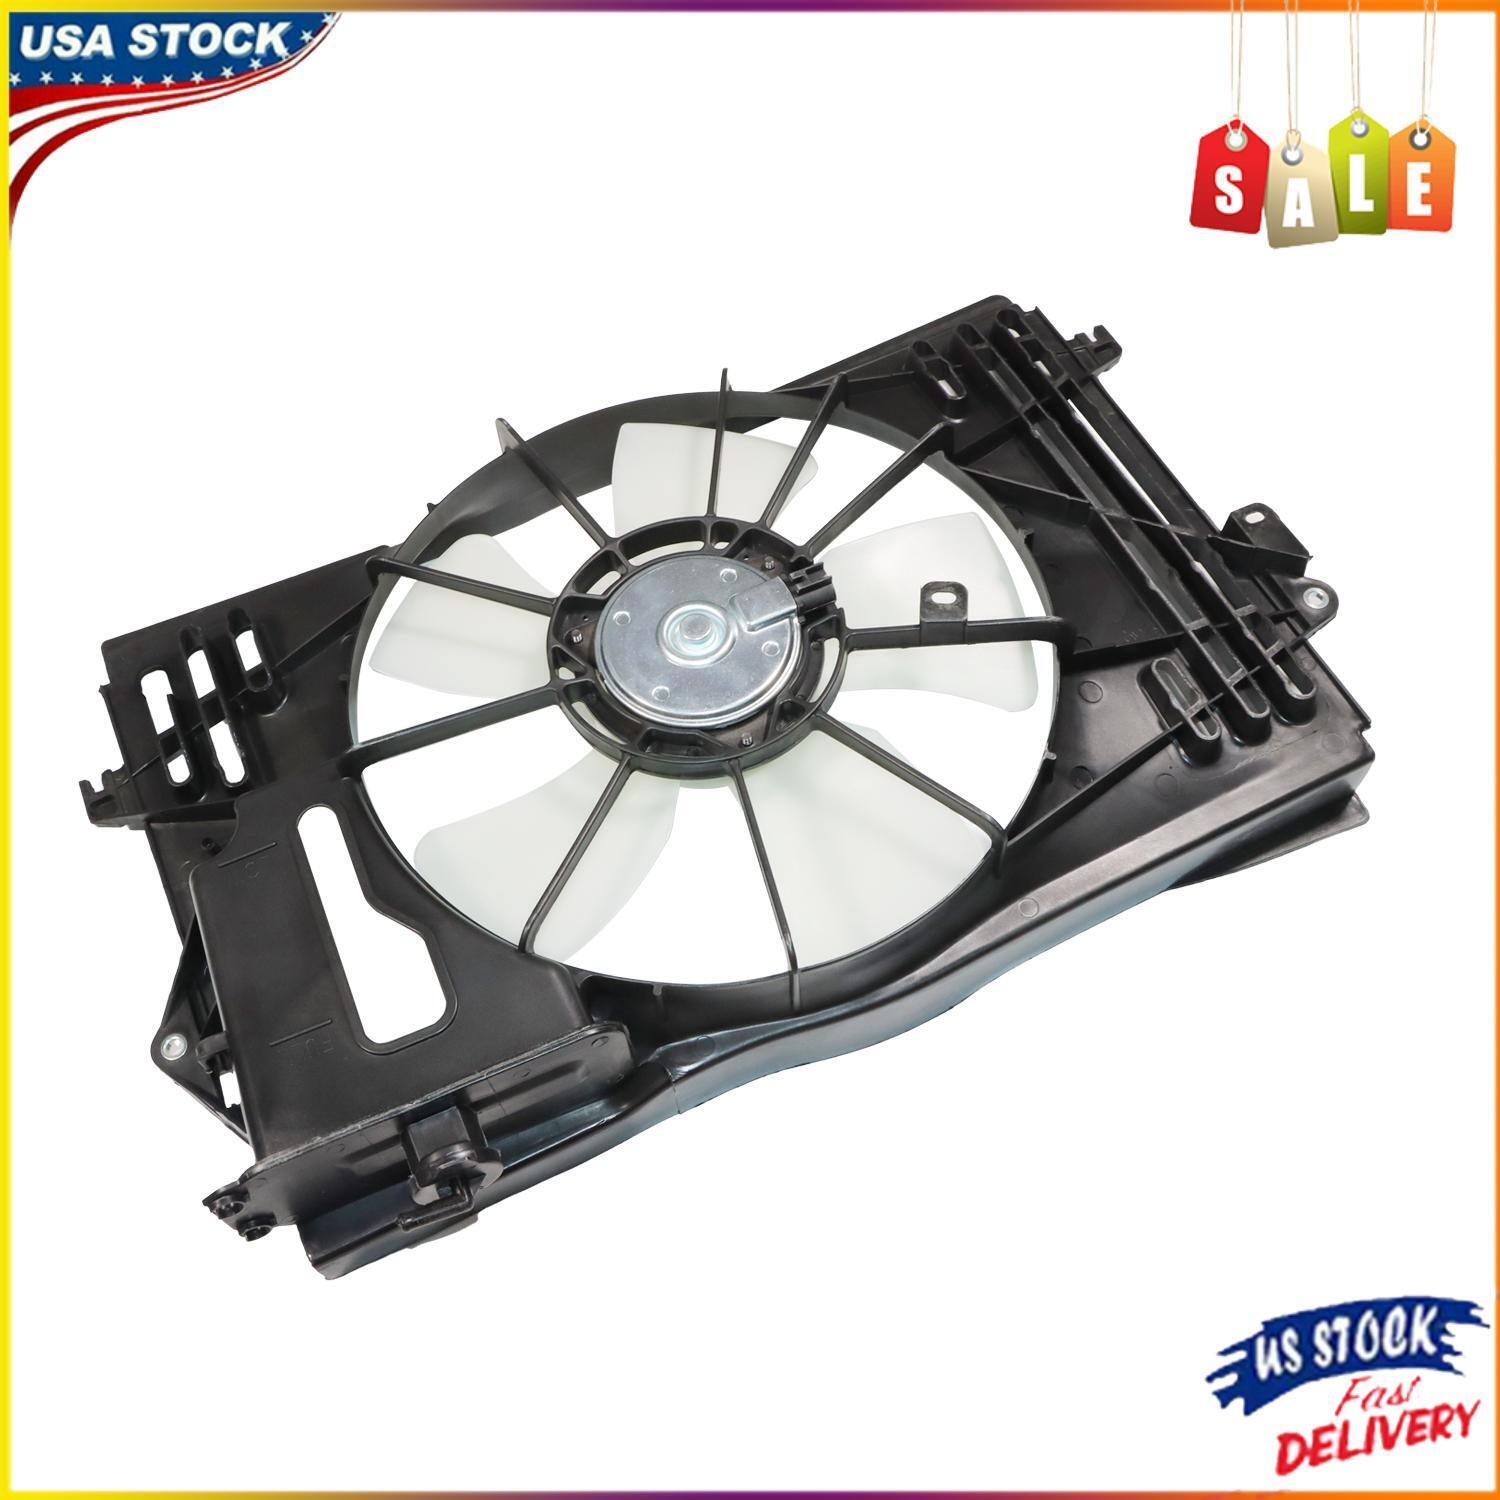 Radiator Condenser Cooling Fan Assembly For 2003-2008 Toyota Corolla/Matrix